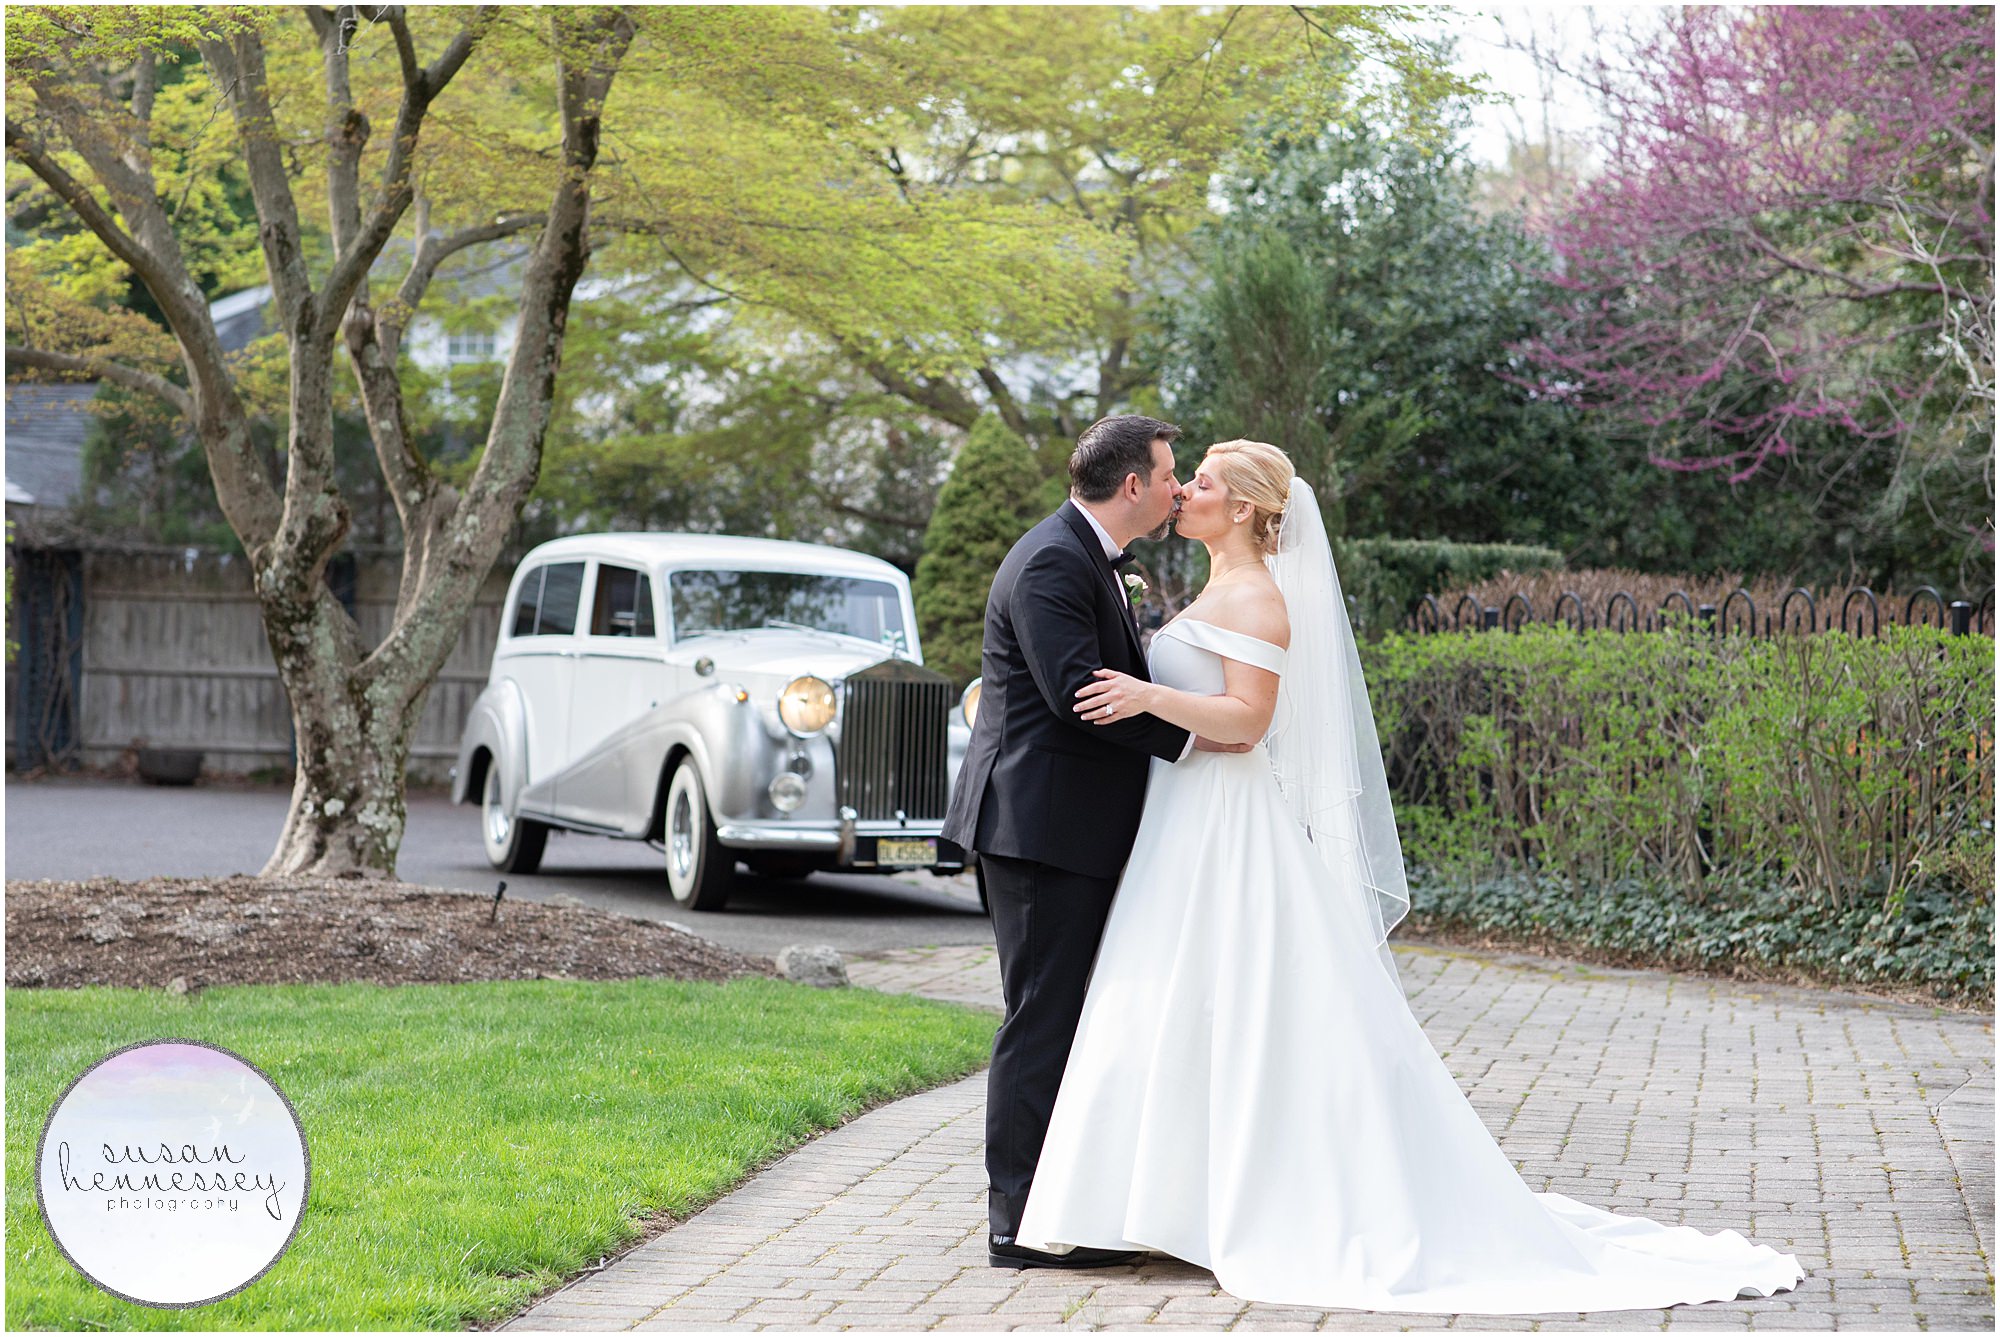 Planning a Micro Wedding? A vintage Rolls Royce is beautiful for portraits.